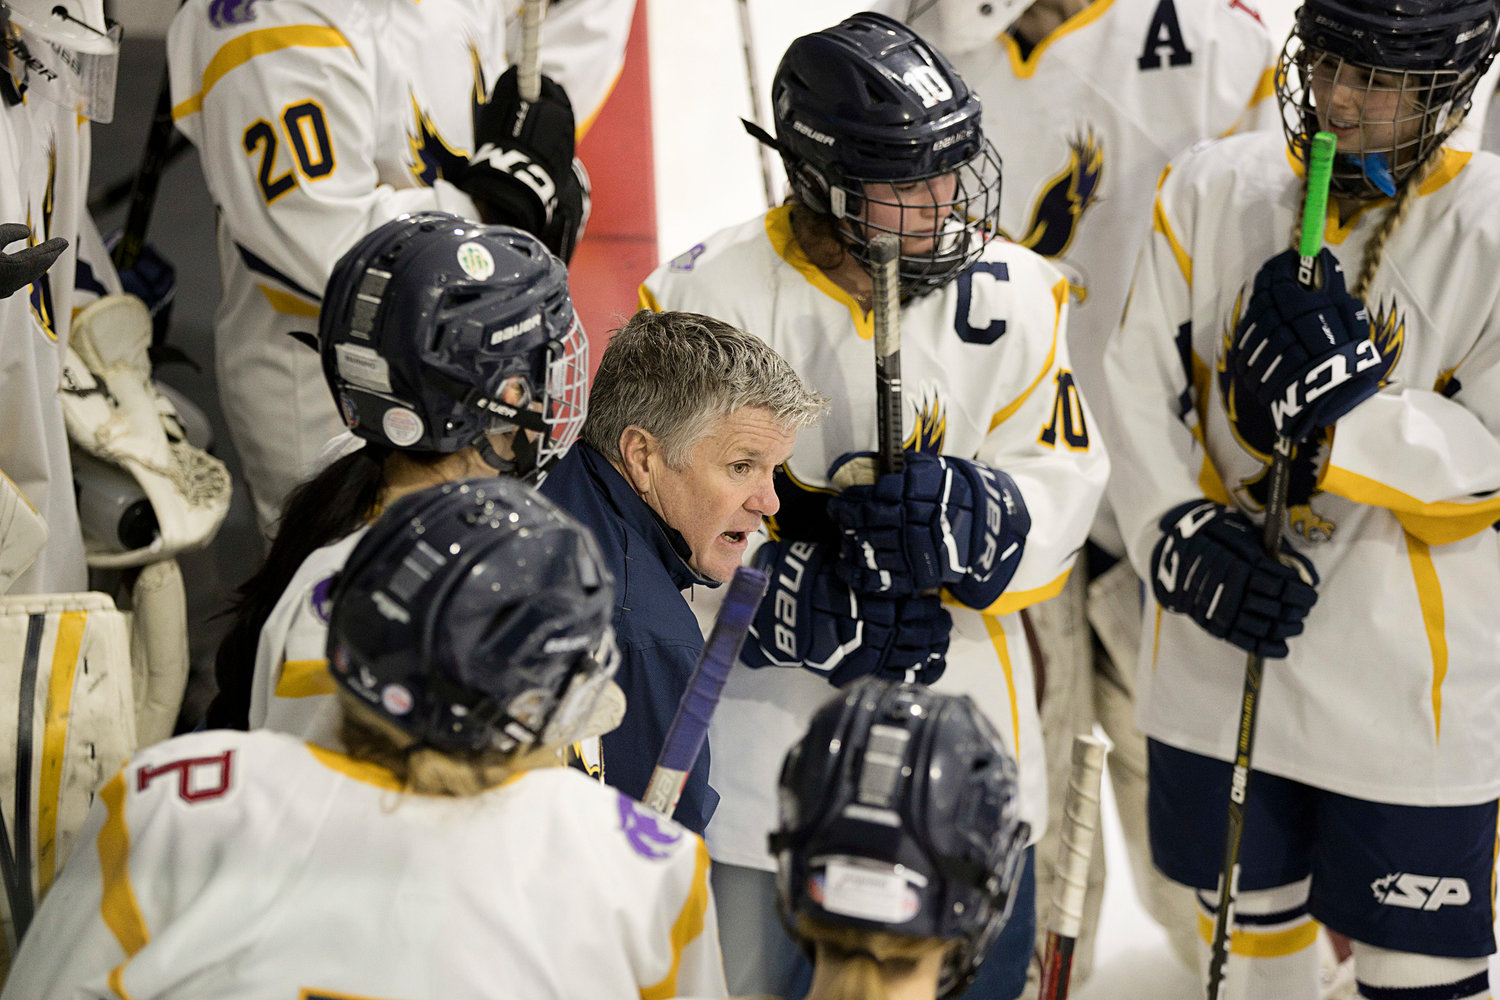 Michael Cox, head coach of the Barrington/Mt. Hope/Portsmouth girls’ co-op hockey team, talks with members of his squad during a timeout.